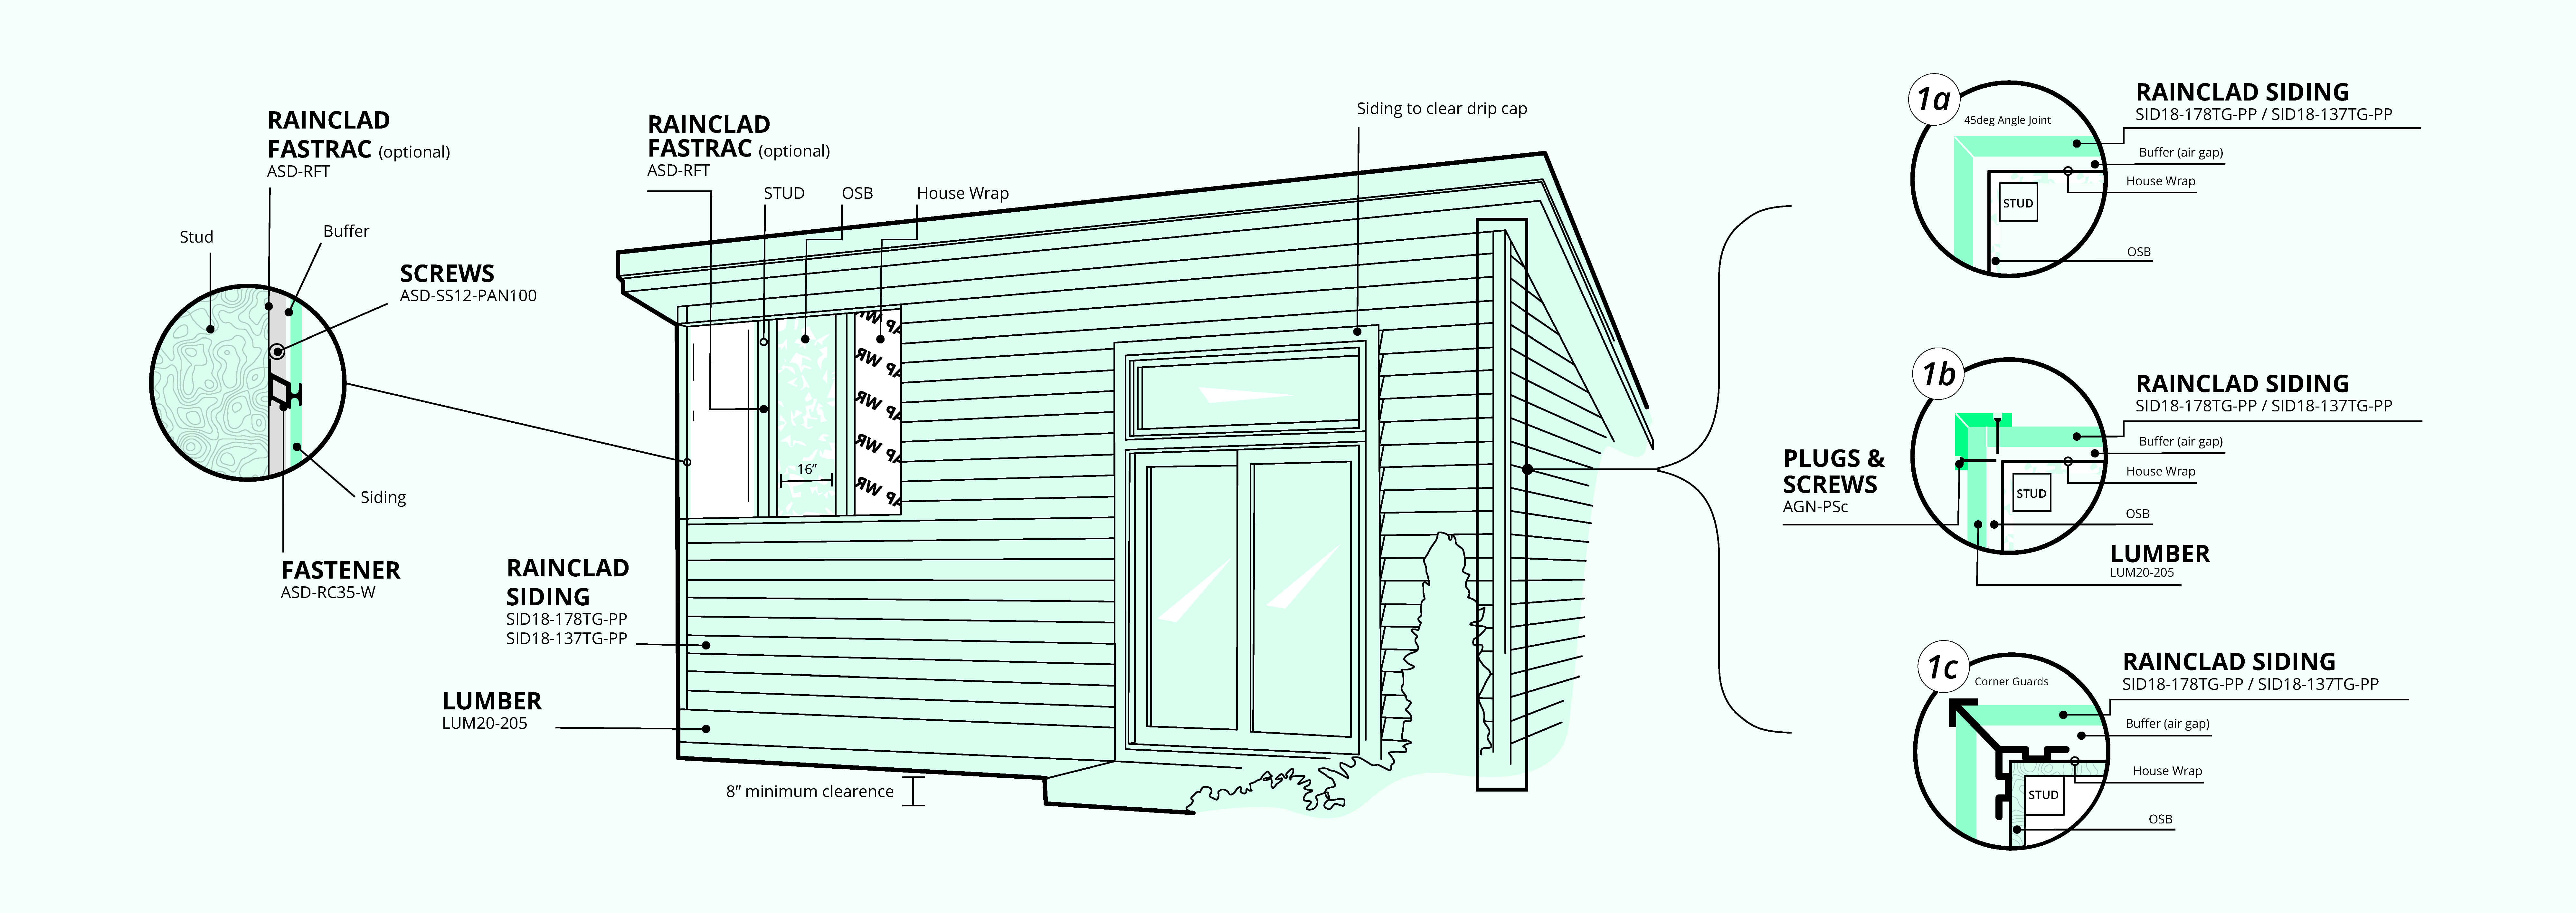 rainclad siding layout and how to guide